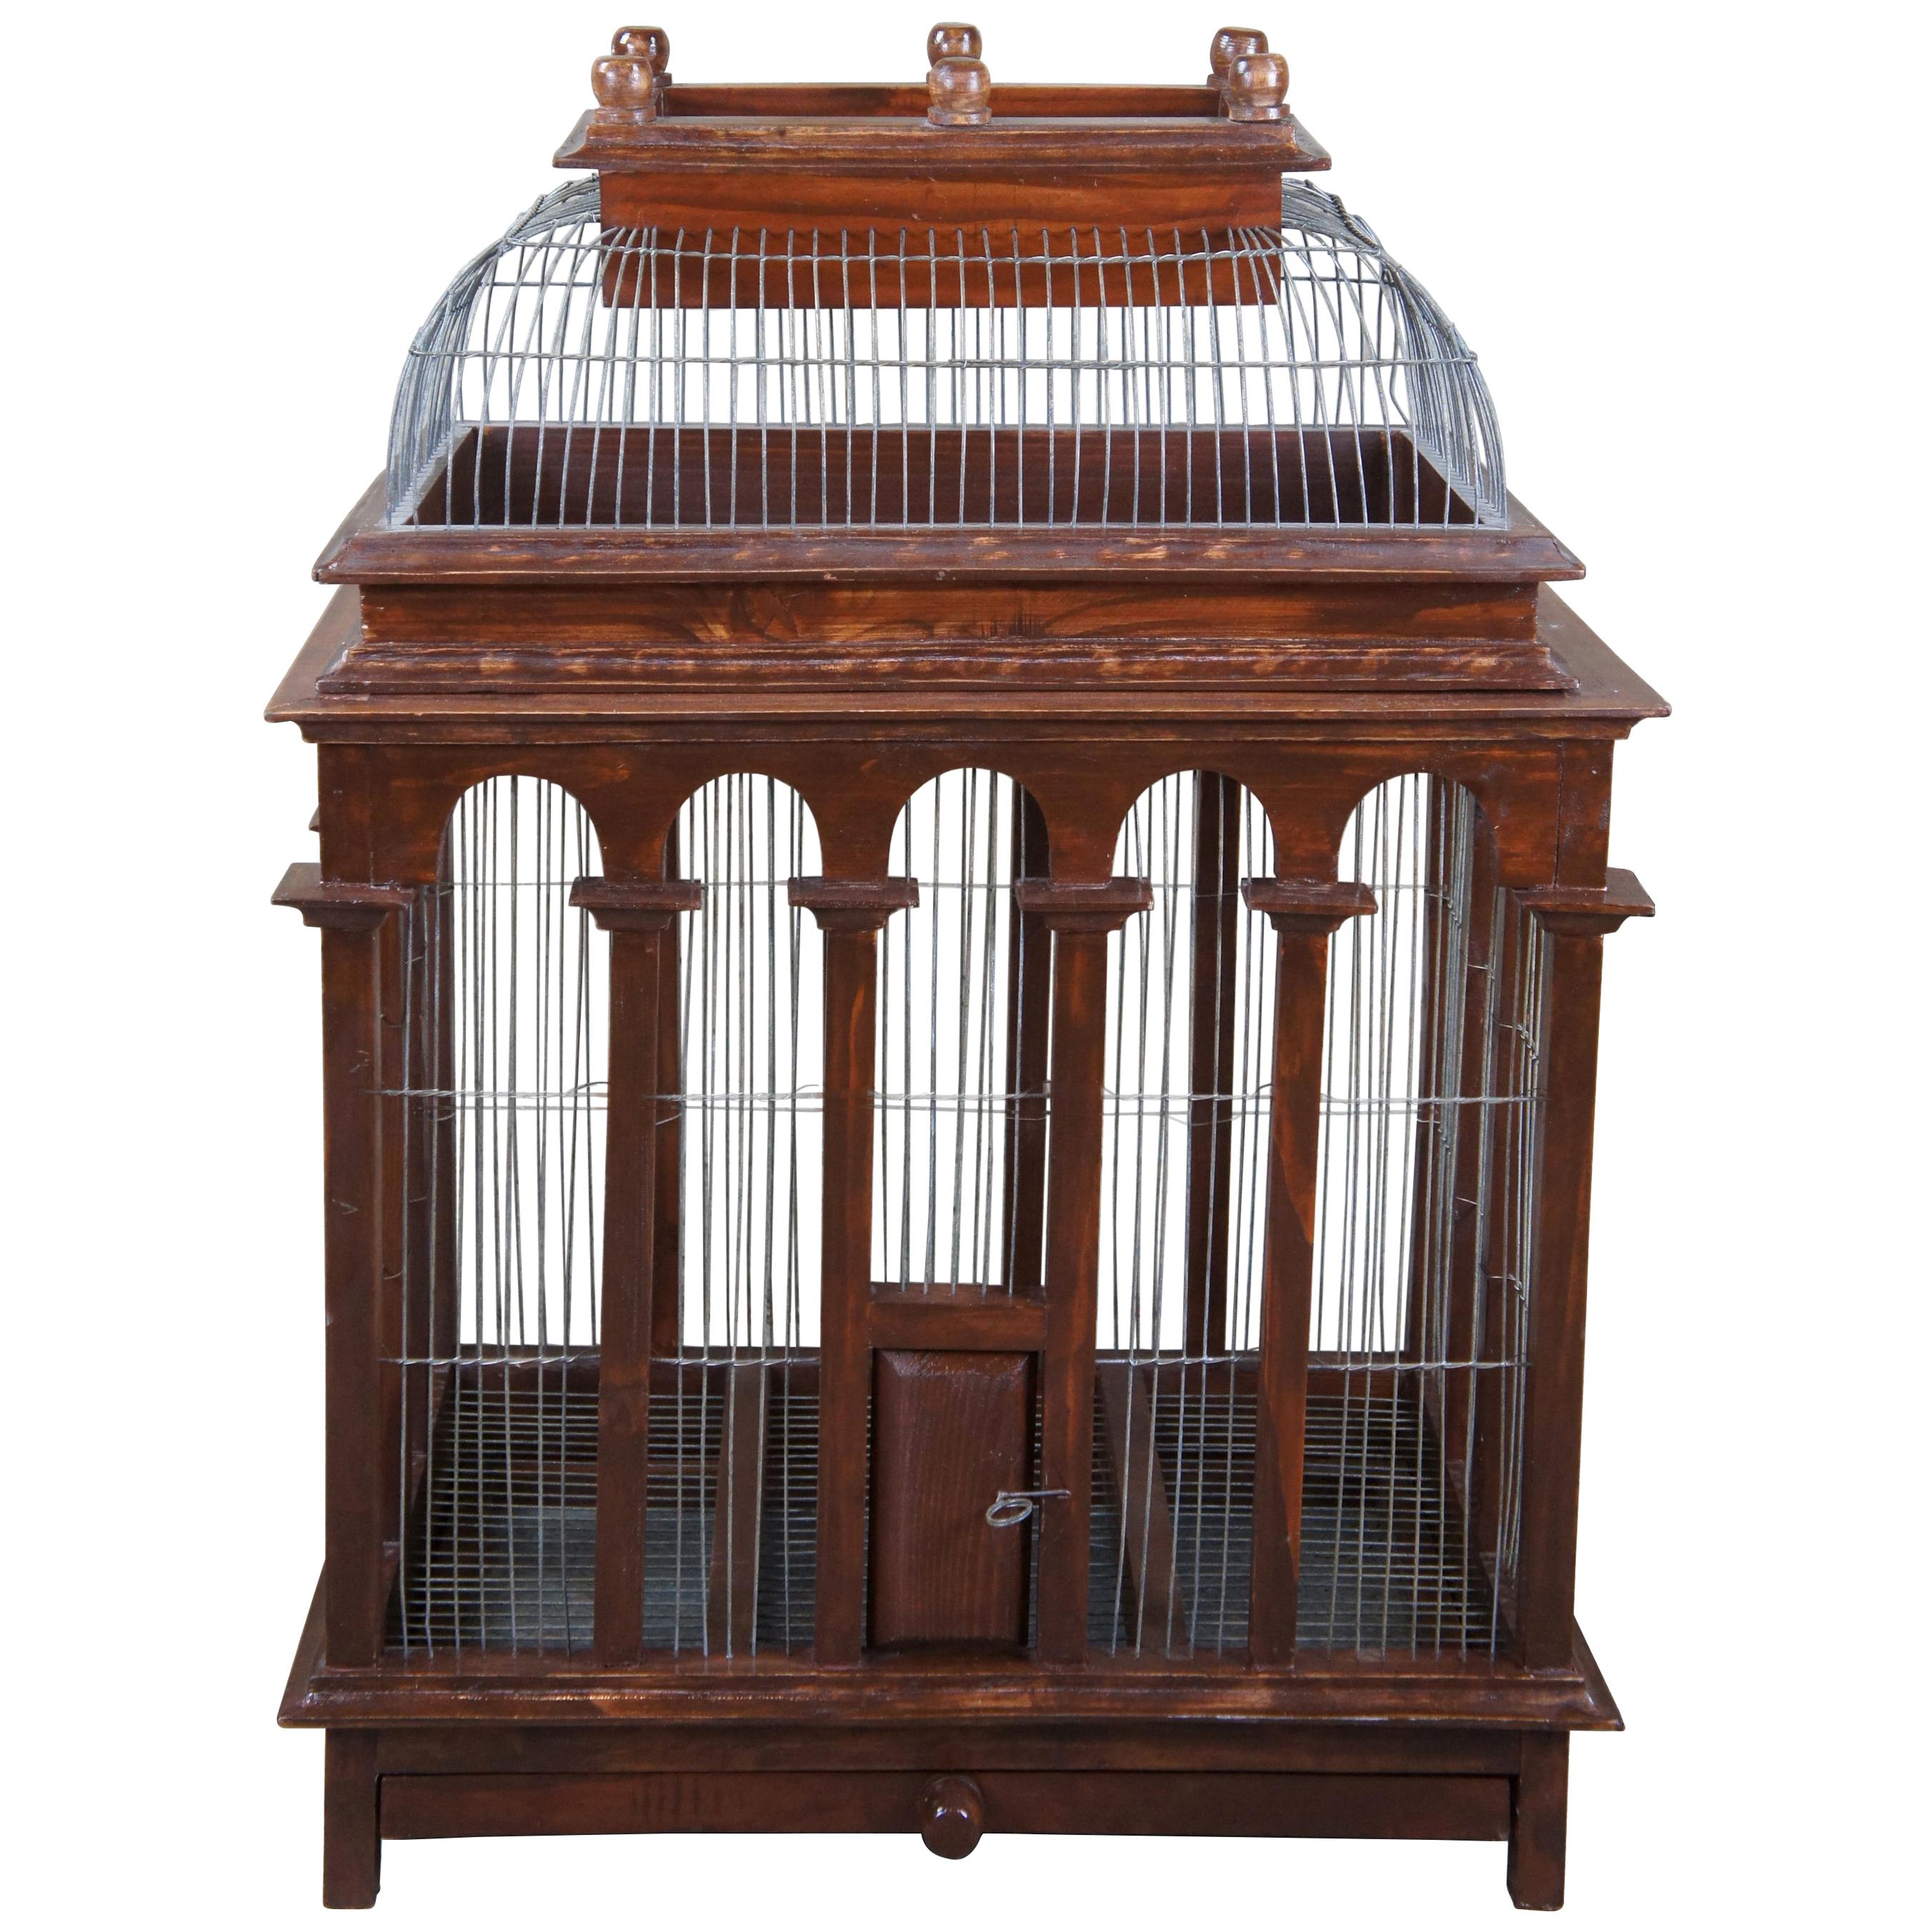 https://a.1stdibscdn.com/antique-victorian-architectural-dome-top-wooden-metal-wire-bird-cage-34-for-sale/1121189/f_236623721620464873130/23662372_master.jpg